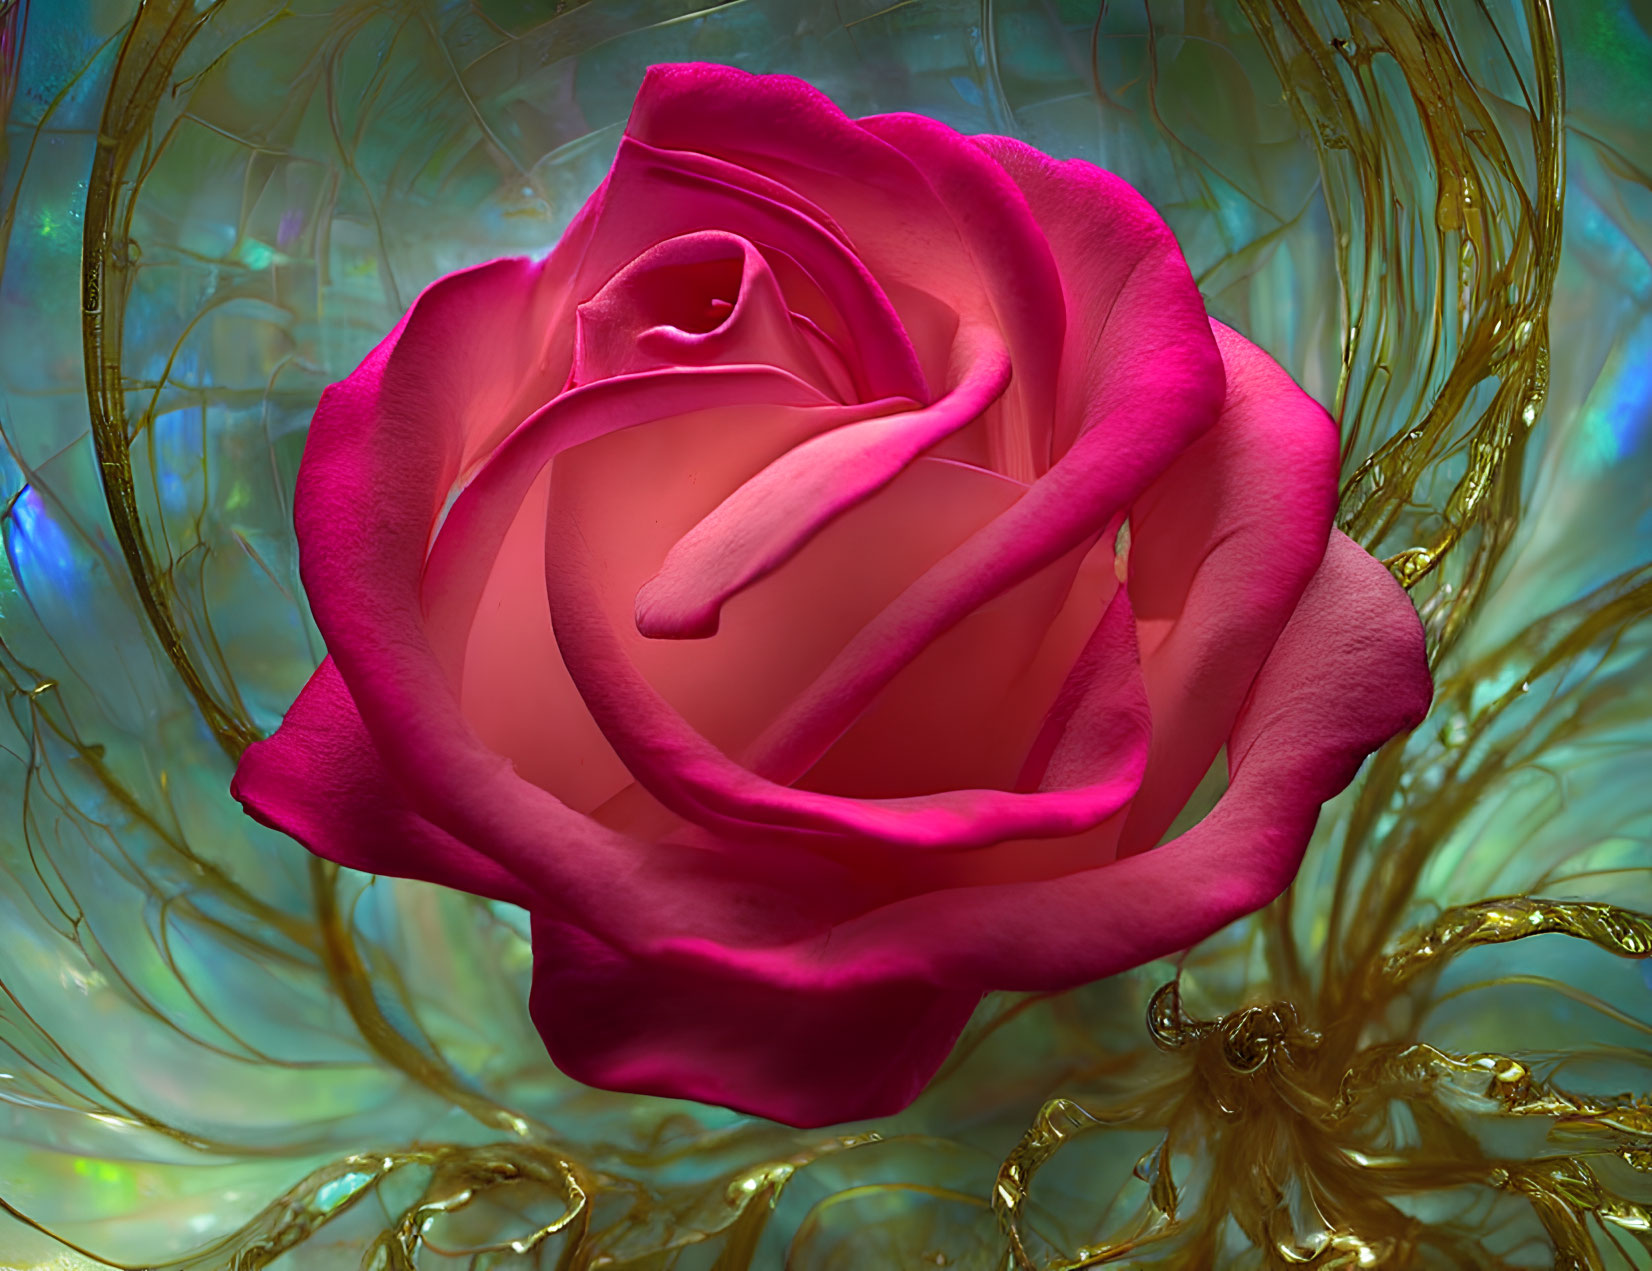 Pink Rose in Full Bloom with Golden Swirls and Turquoise Background